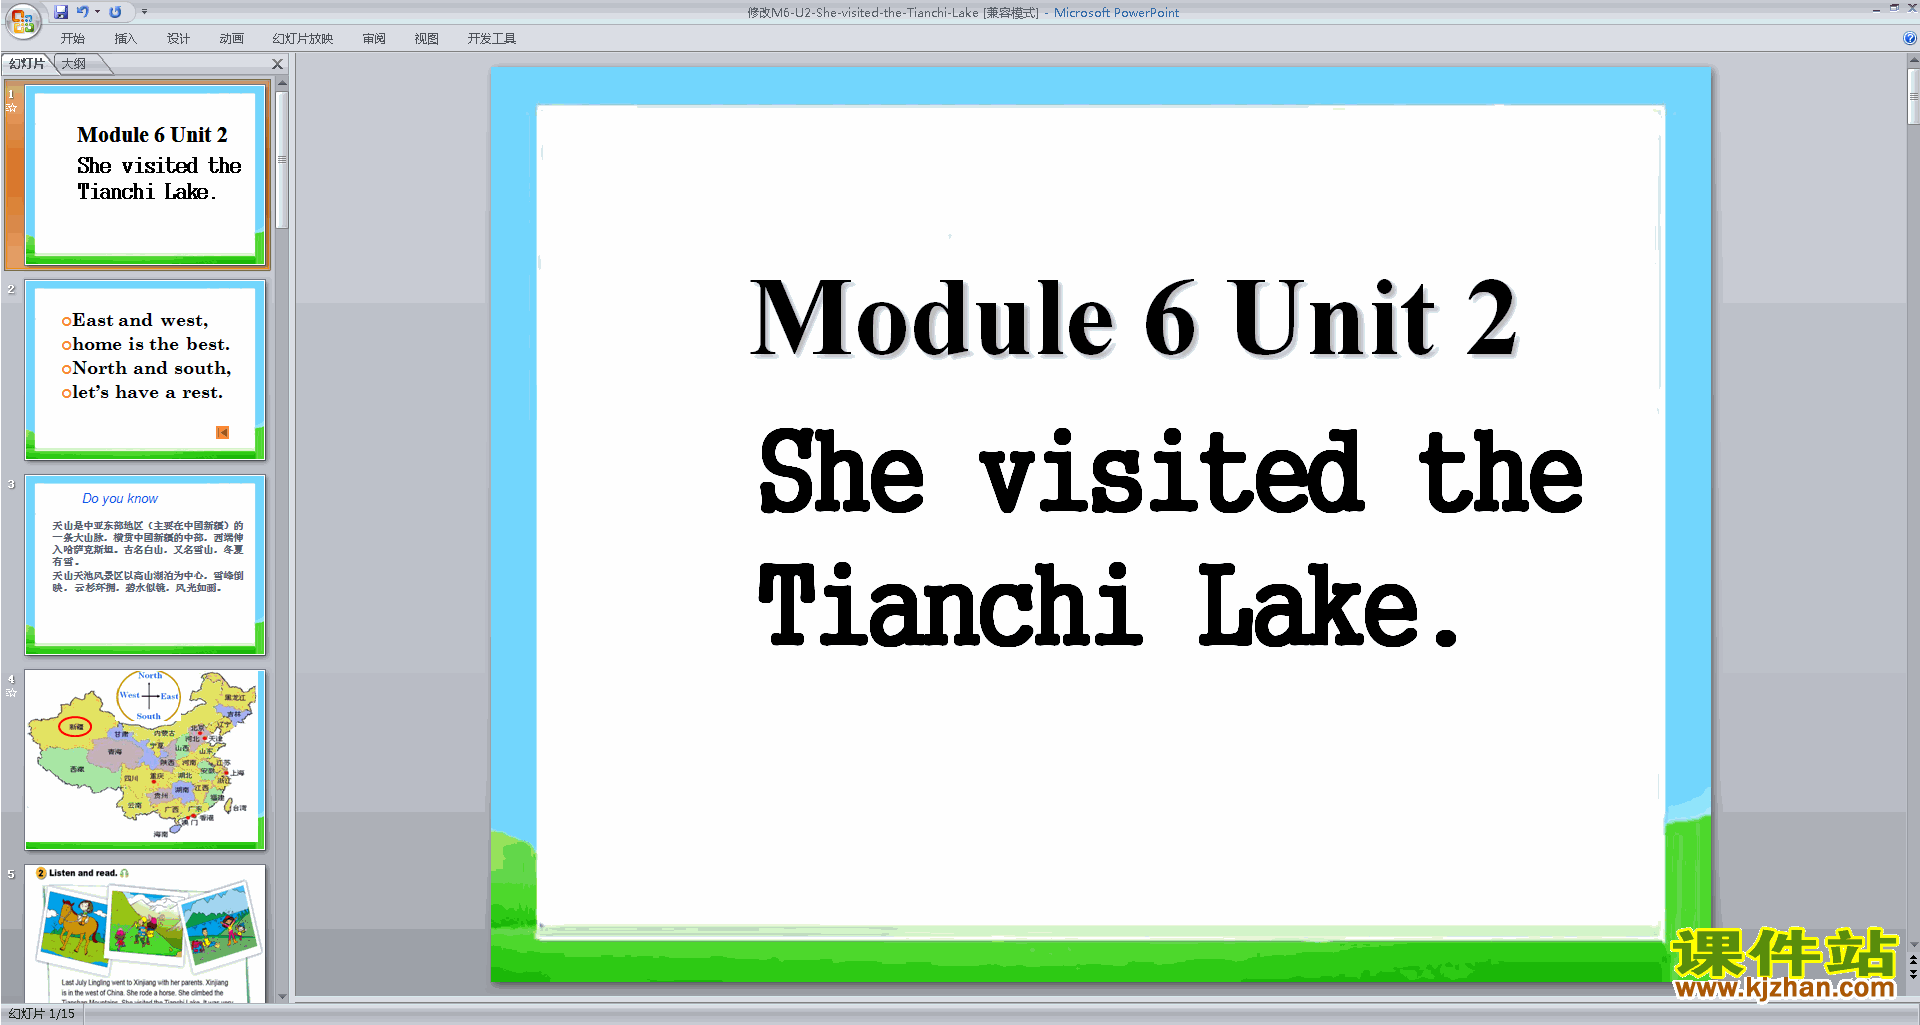 пShe visited the Tianchi Lakepptμ